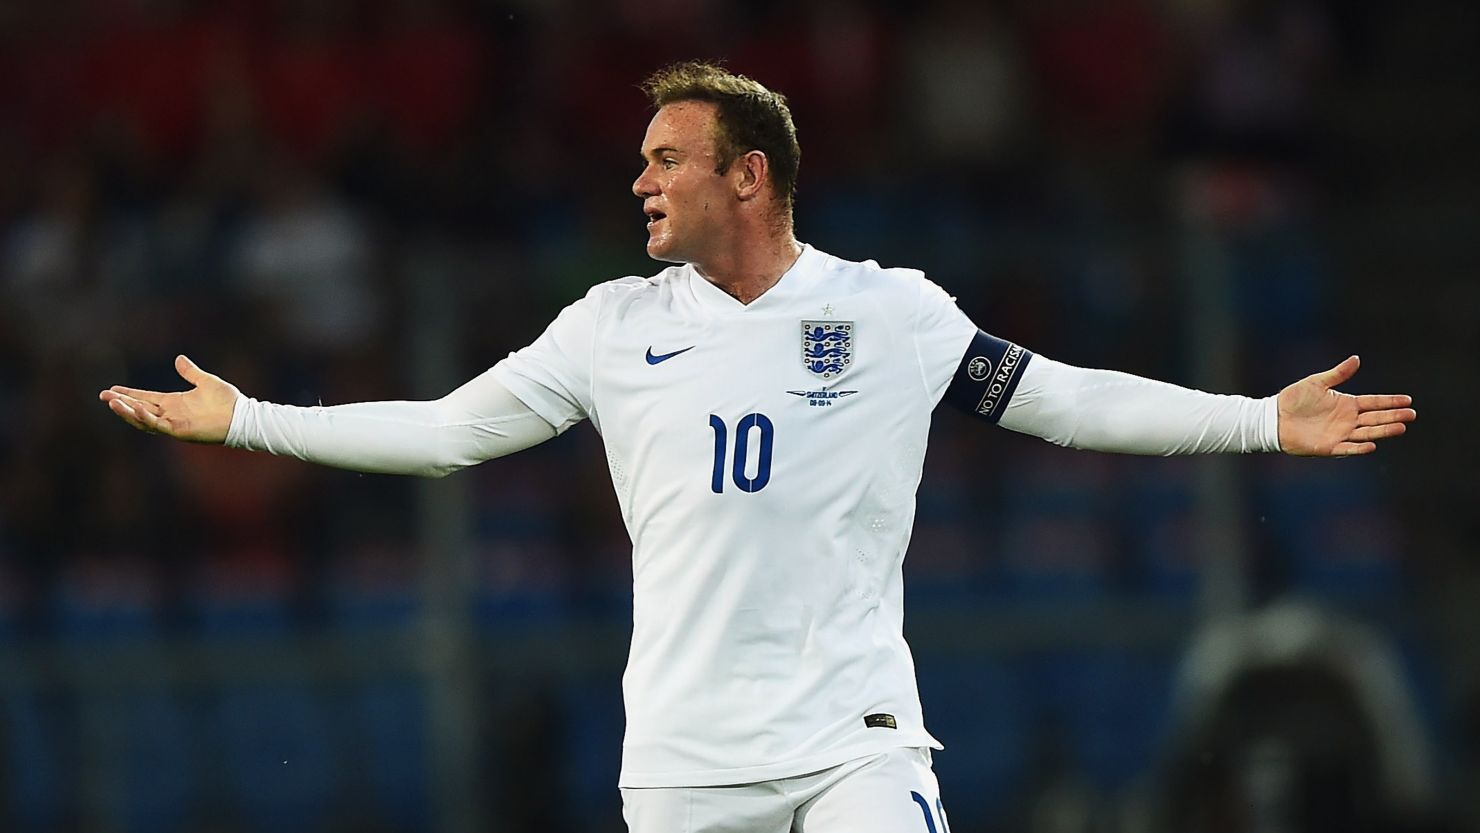 Wayne Rooney captained England in its 2-0 victory over Switzerland.